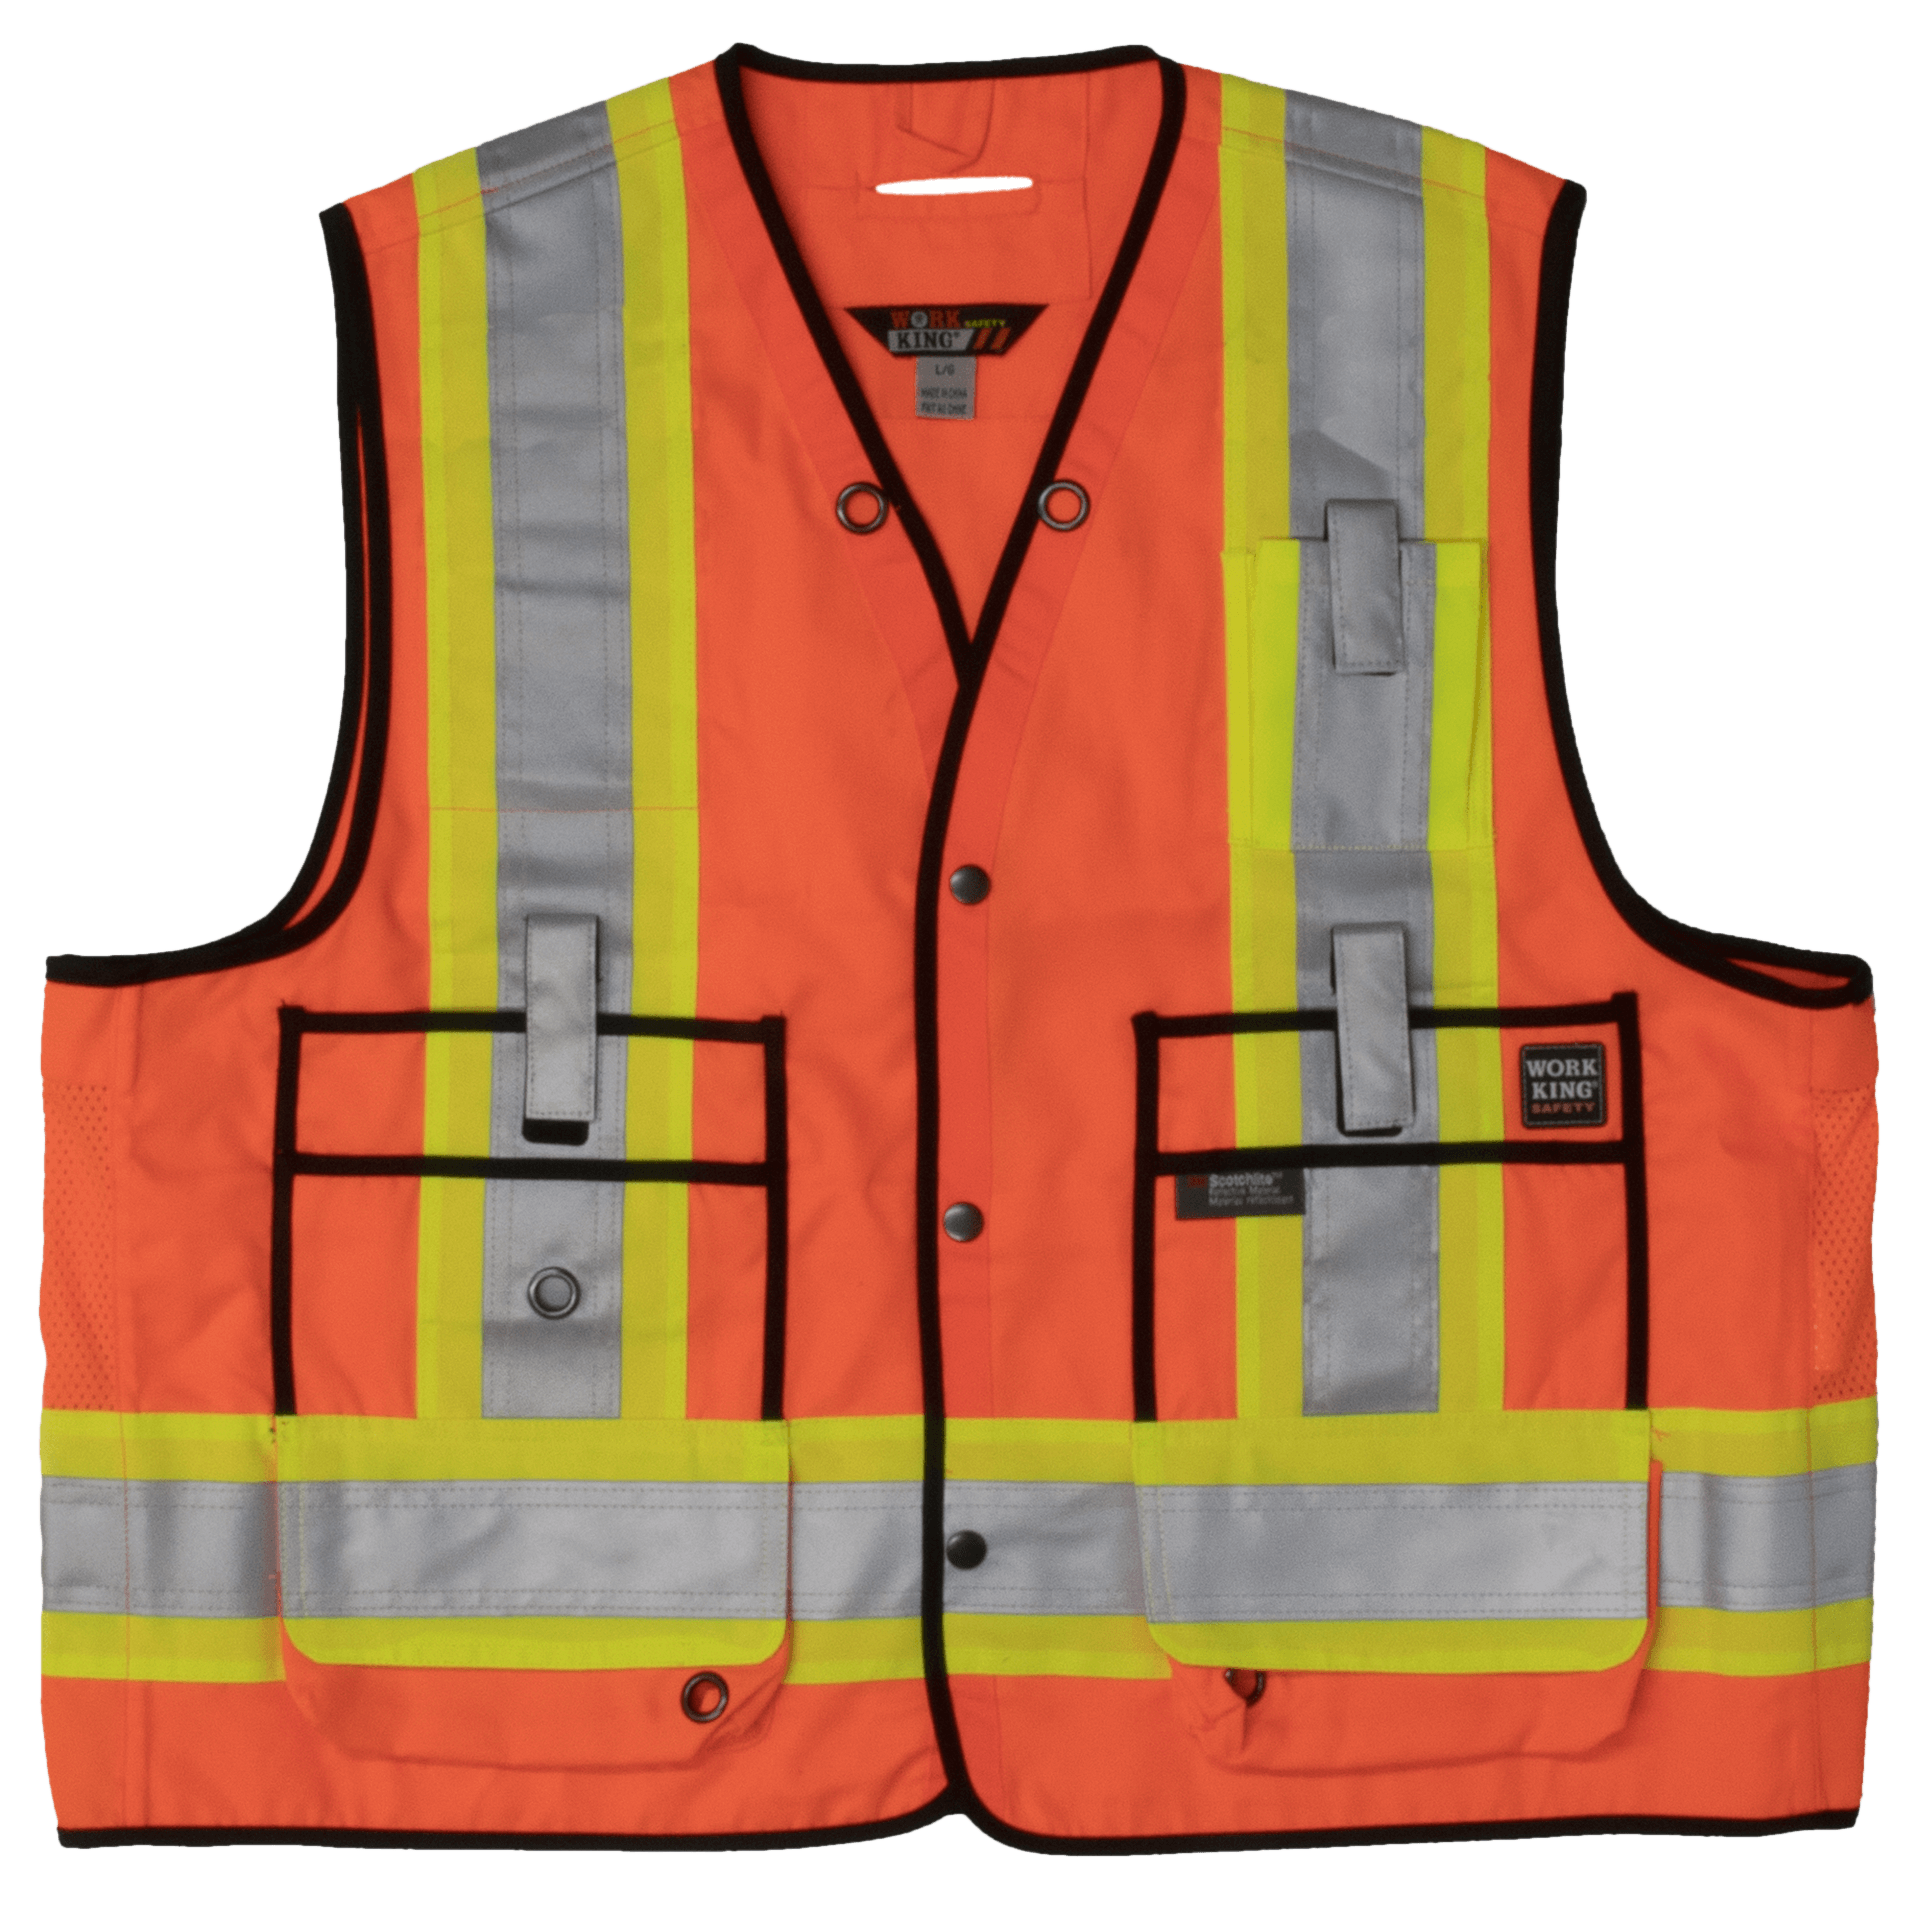 Mutual Industries 16333-45-4 High Visibility Mesh Super Deluxe Surveyor Vest with 2 Vertical and 2 Horizontal 1-1/2 Lime/Silver/Lime Reflective Stripes X-Large Orange 